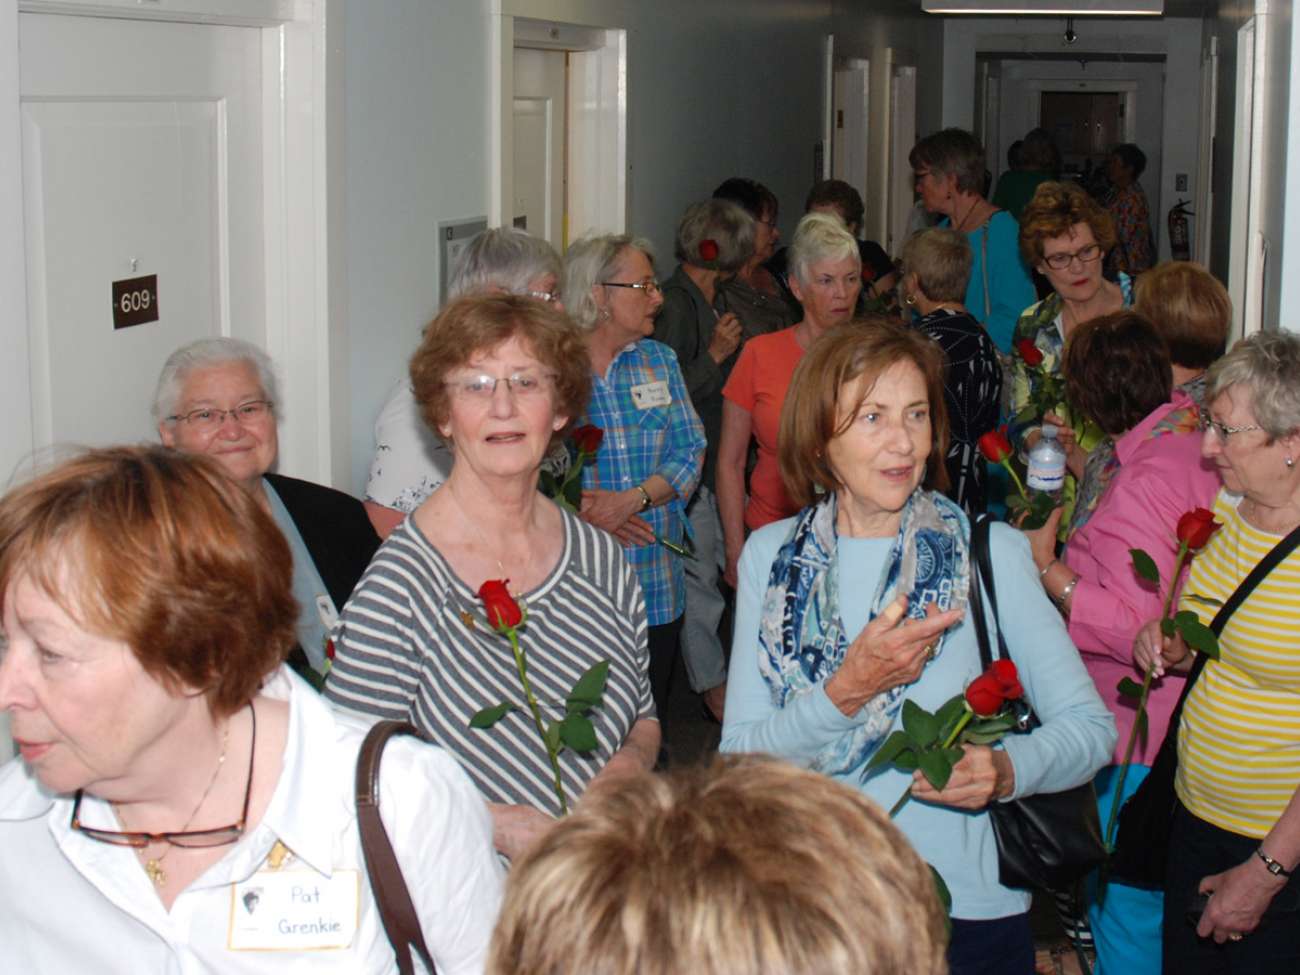 Tour participants in the Kaufman building, their former residence as nursing students